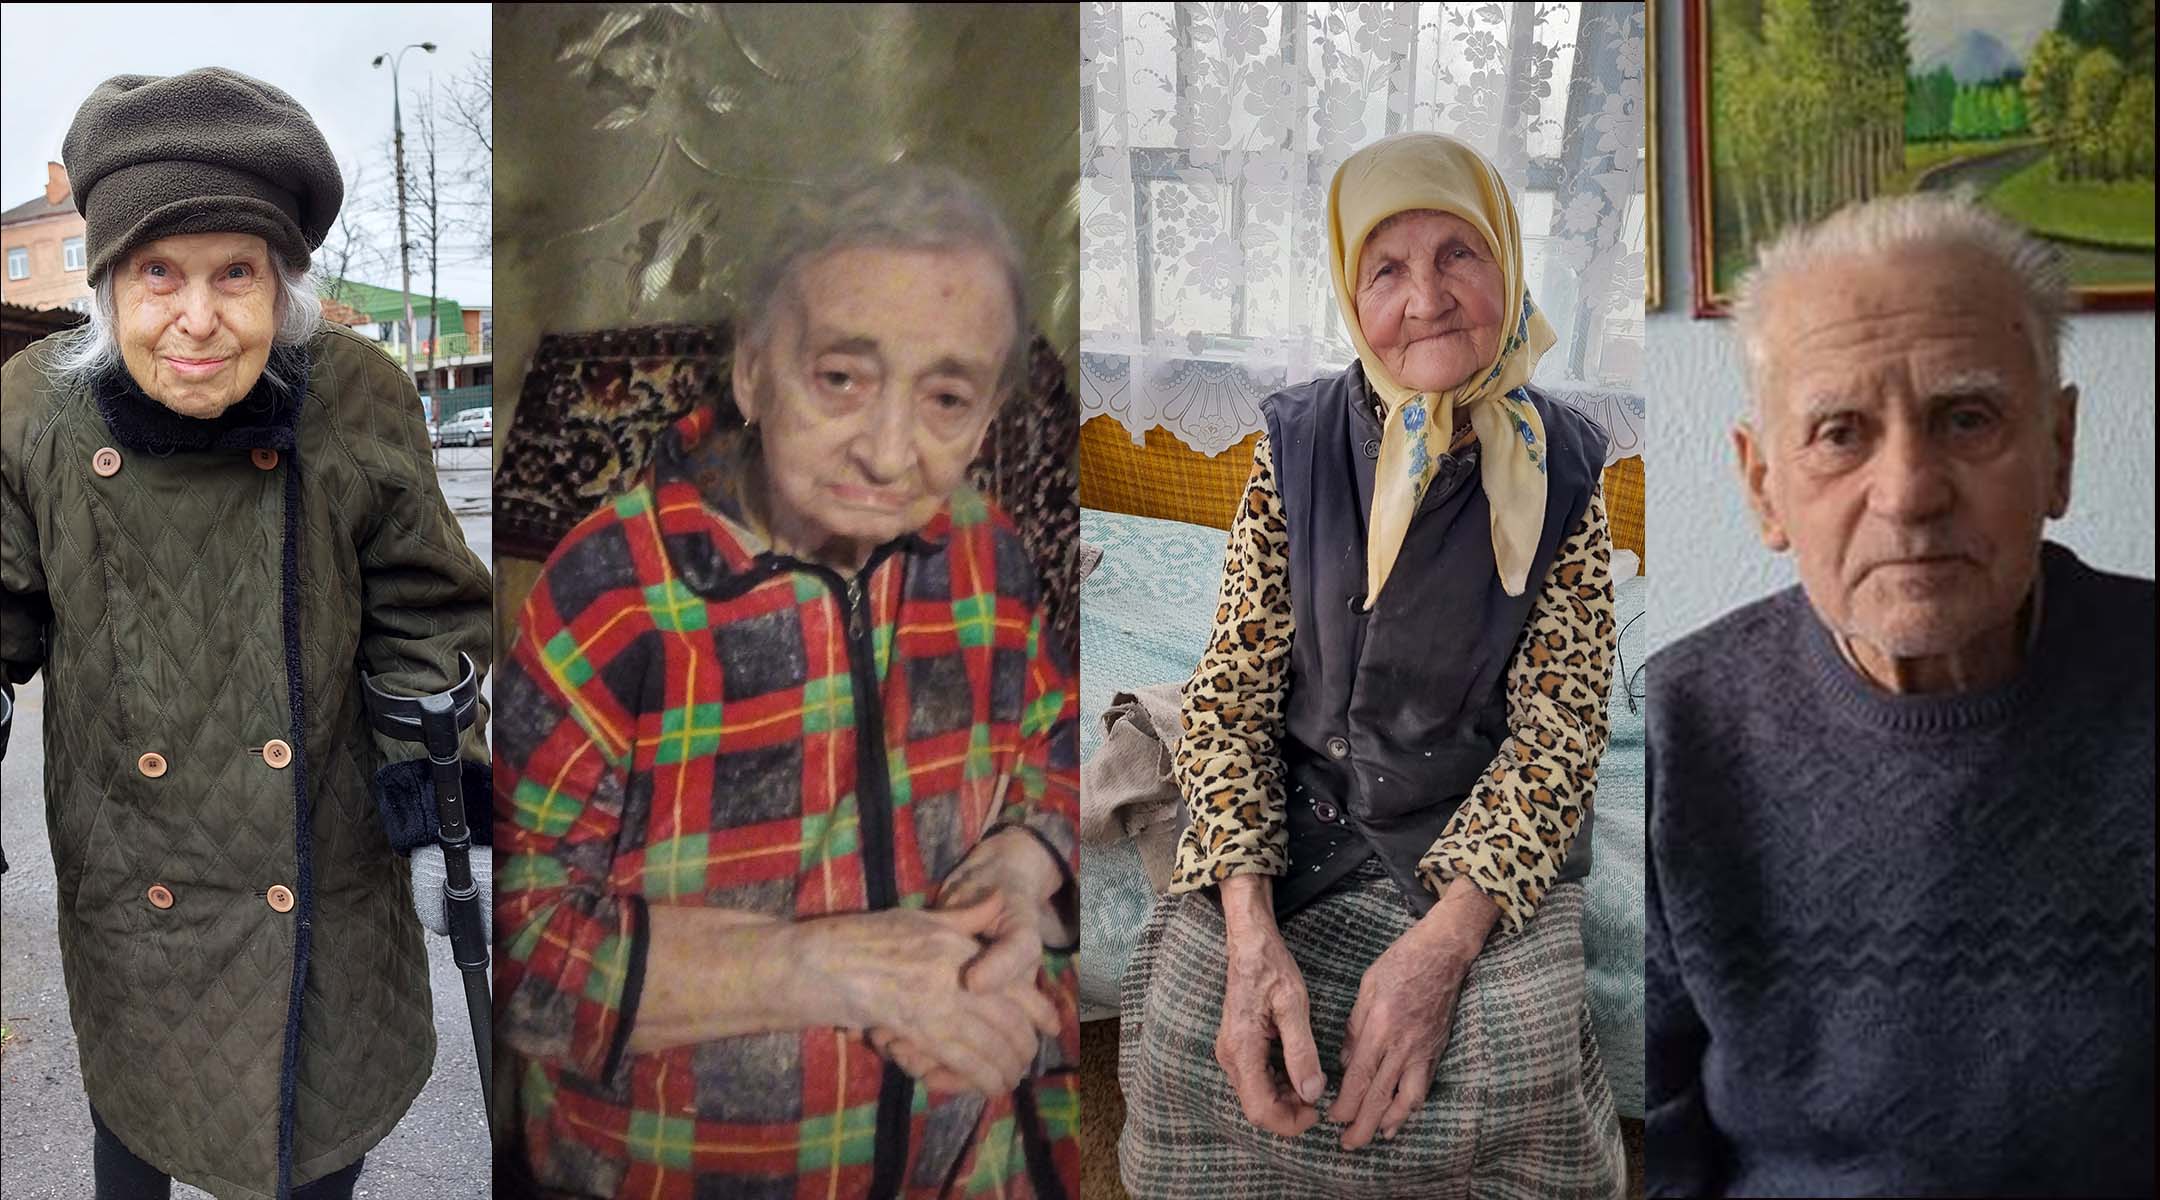 Lidia S., Olympiada D., Aleksandra B. and Aleksander S. are among 15 Ukrainians named “Righteous Among The Nation” who helped save Jews during the Holocaust who were still living in Ukraine when Russia invaded. (Courtesy of The Jewish Foundation for the Righteous)